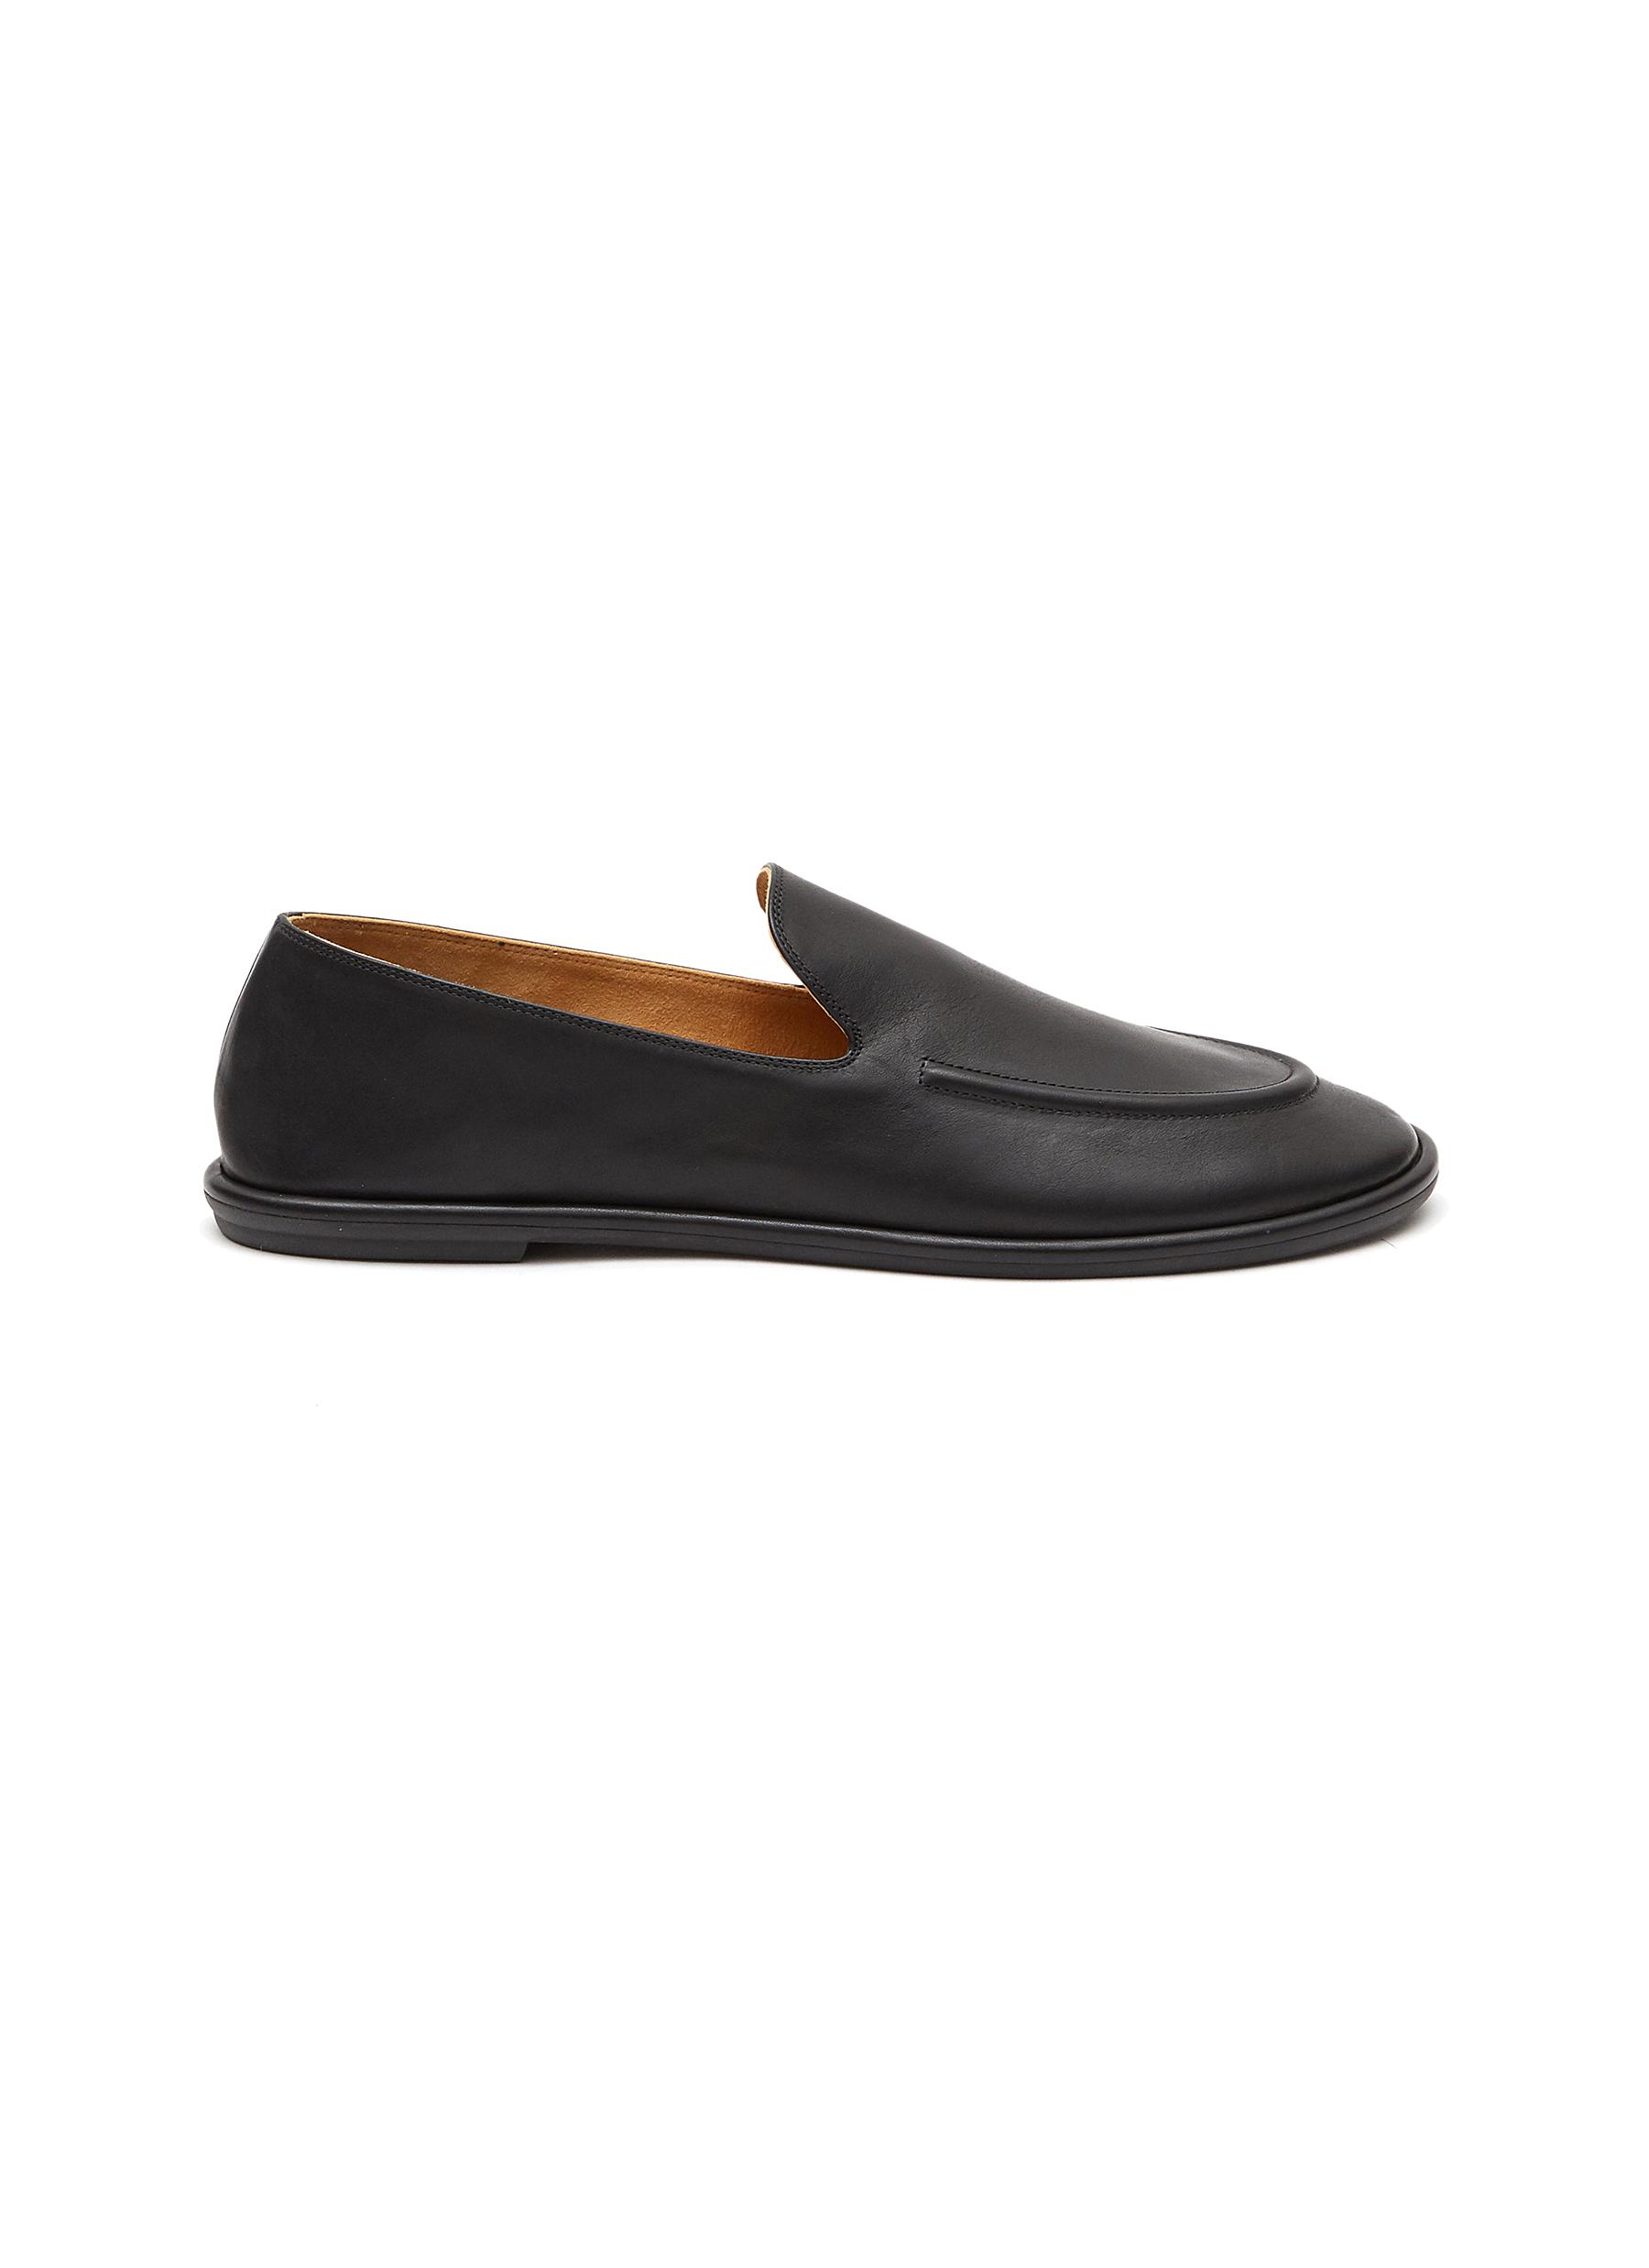 Round toe vegan leather loafers